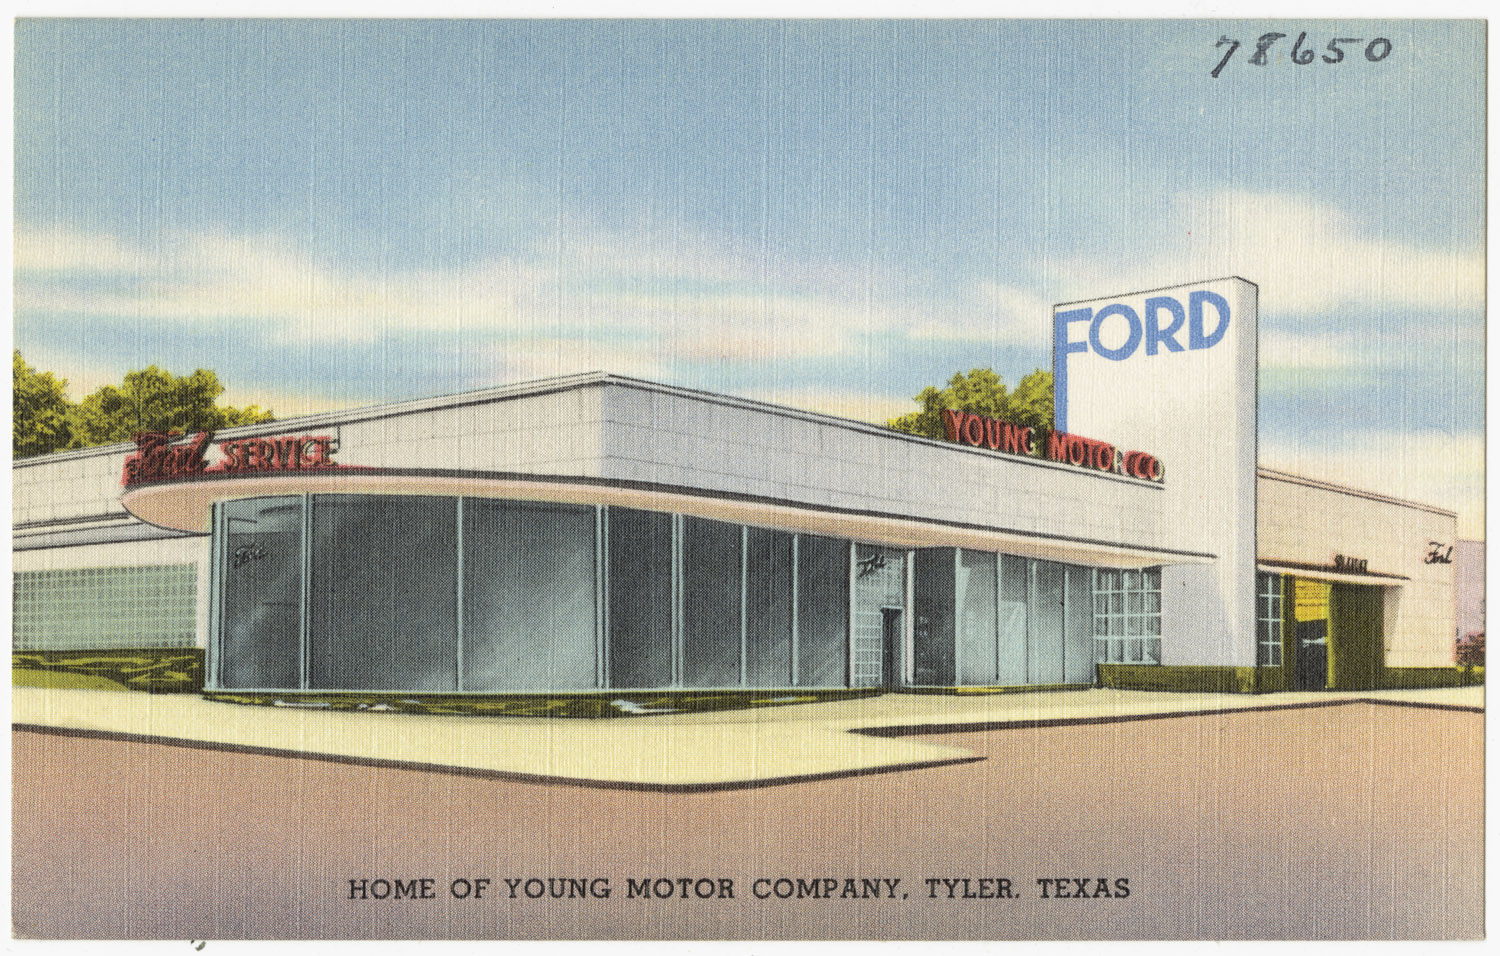 an old postcard shows the front entrance to a motor shop